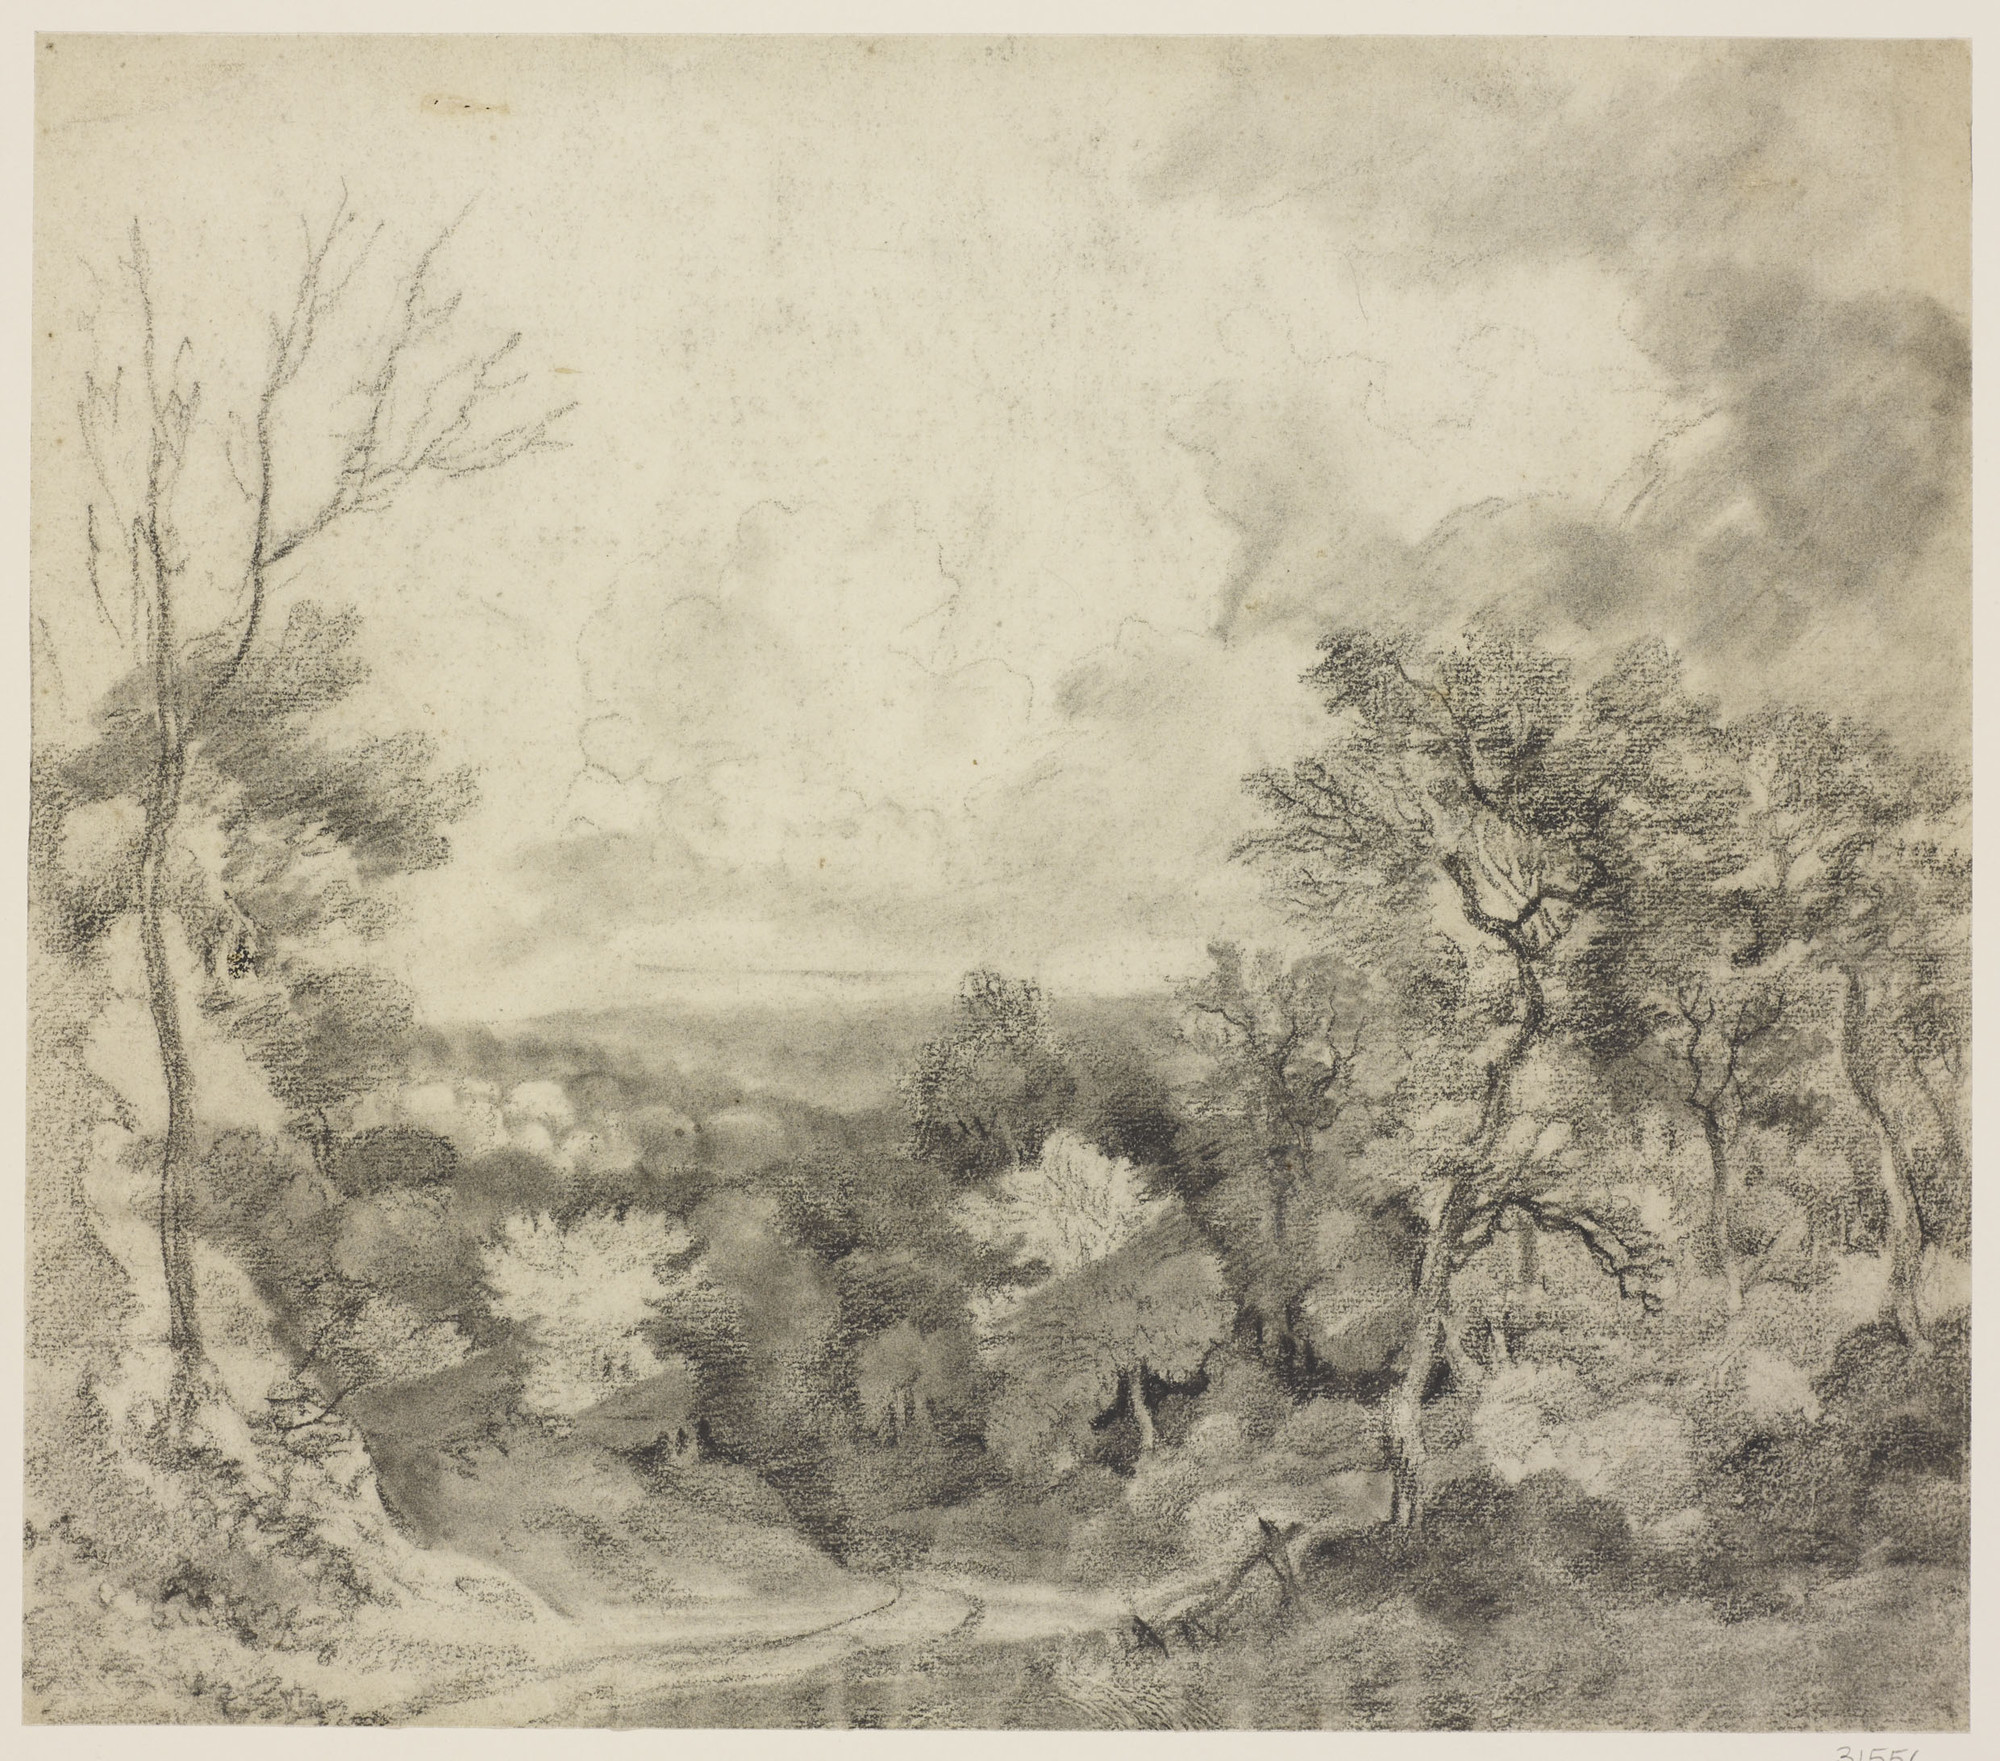 A&nbsp;drawing in black chalk and stump&nbsp;showing trees lining a road&nbsp;descending from the foreground left. The drawing possibly relates to a painting&nbsp;formerly in the collection of&nbsp;William Beckford&nbsp;and sold at Christie's, 25 March 19